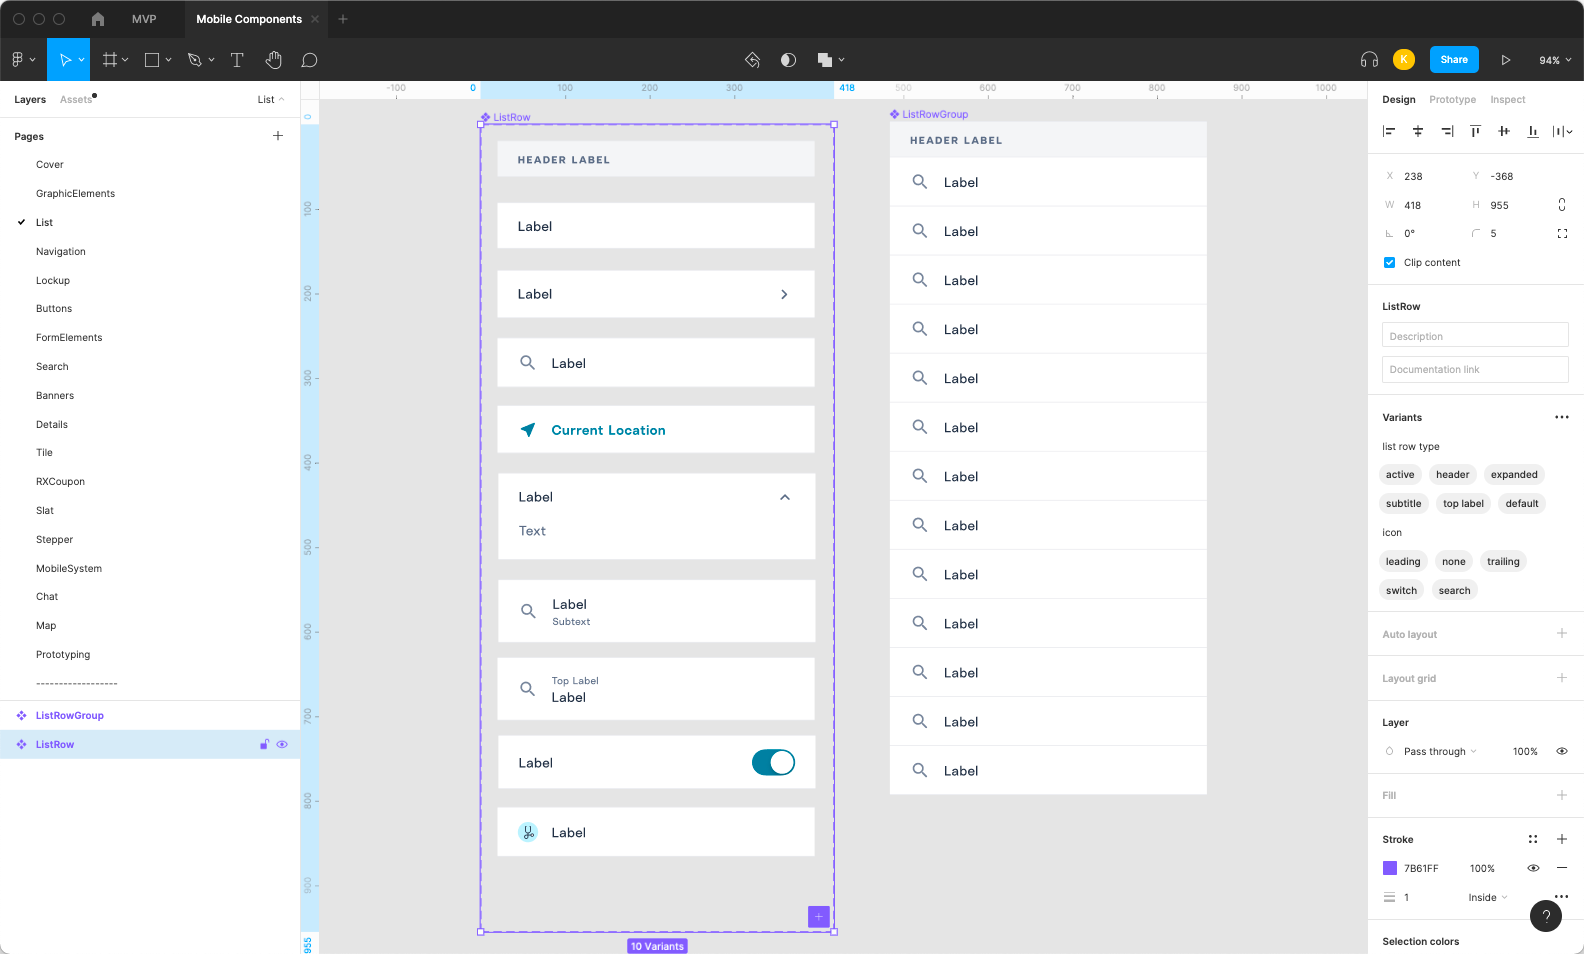 A screenshot of the mobile components Figma file